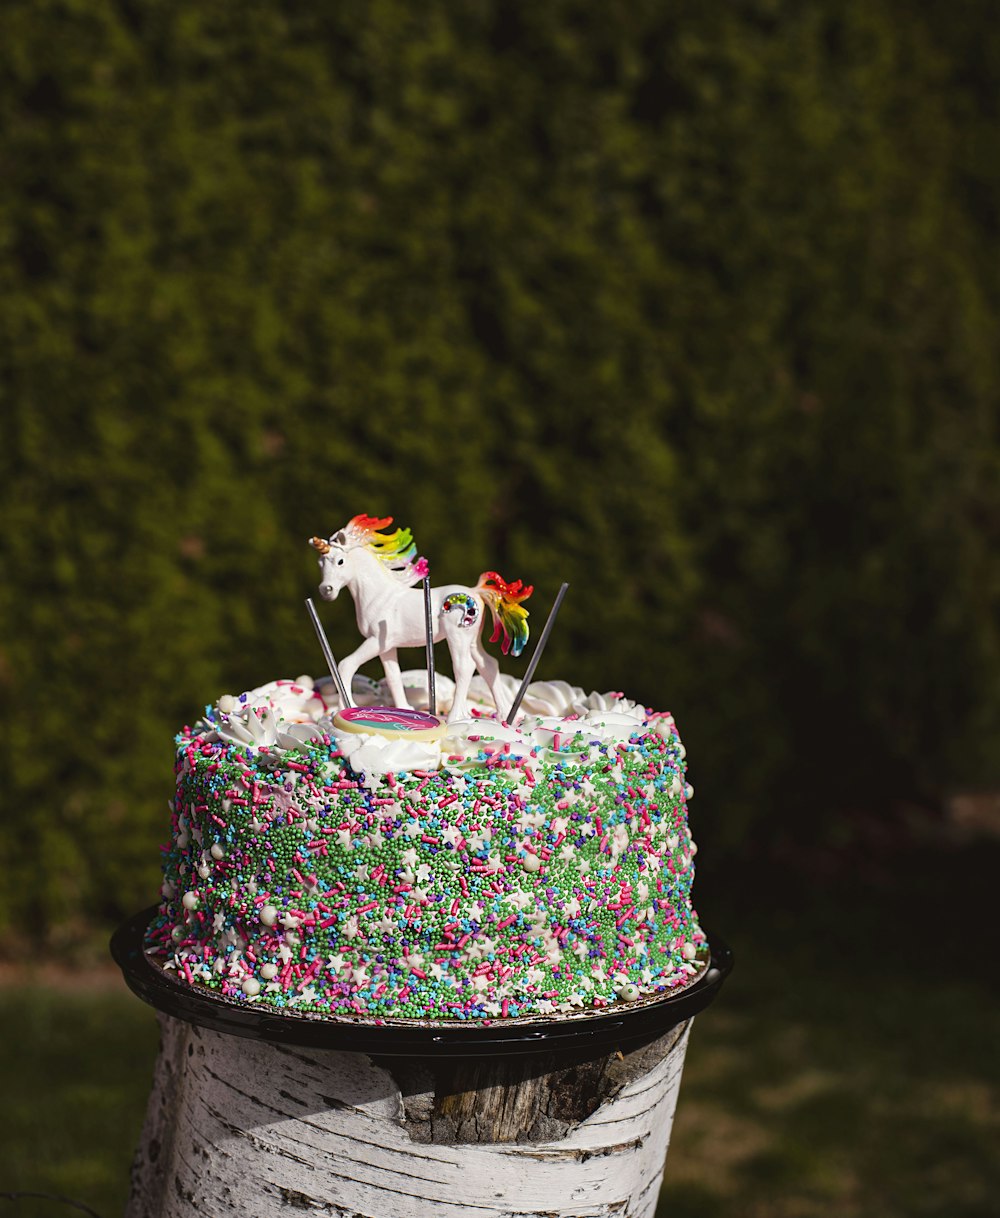 a group of horses on a cake